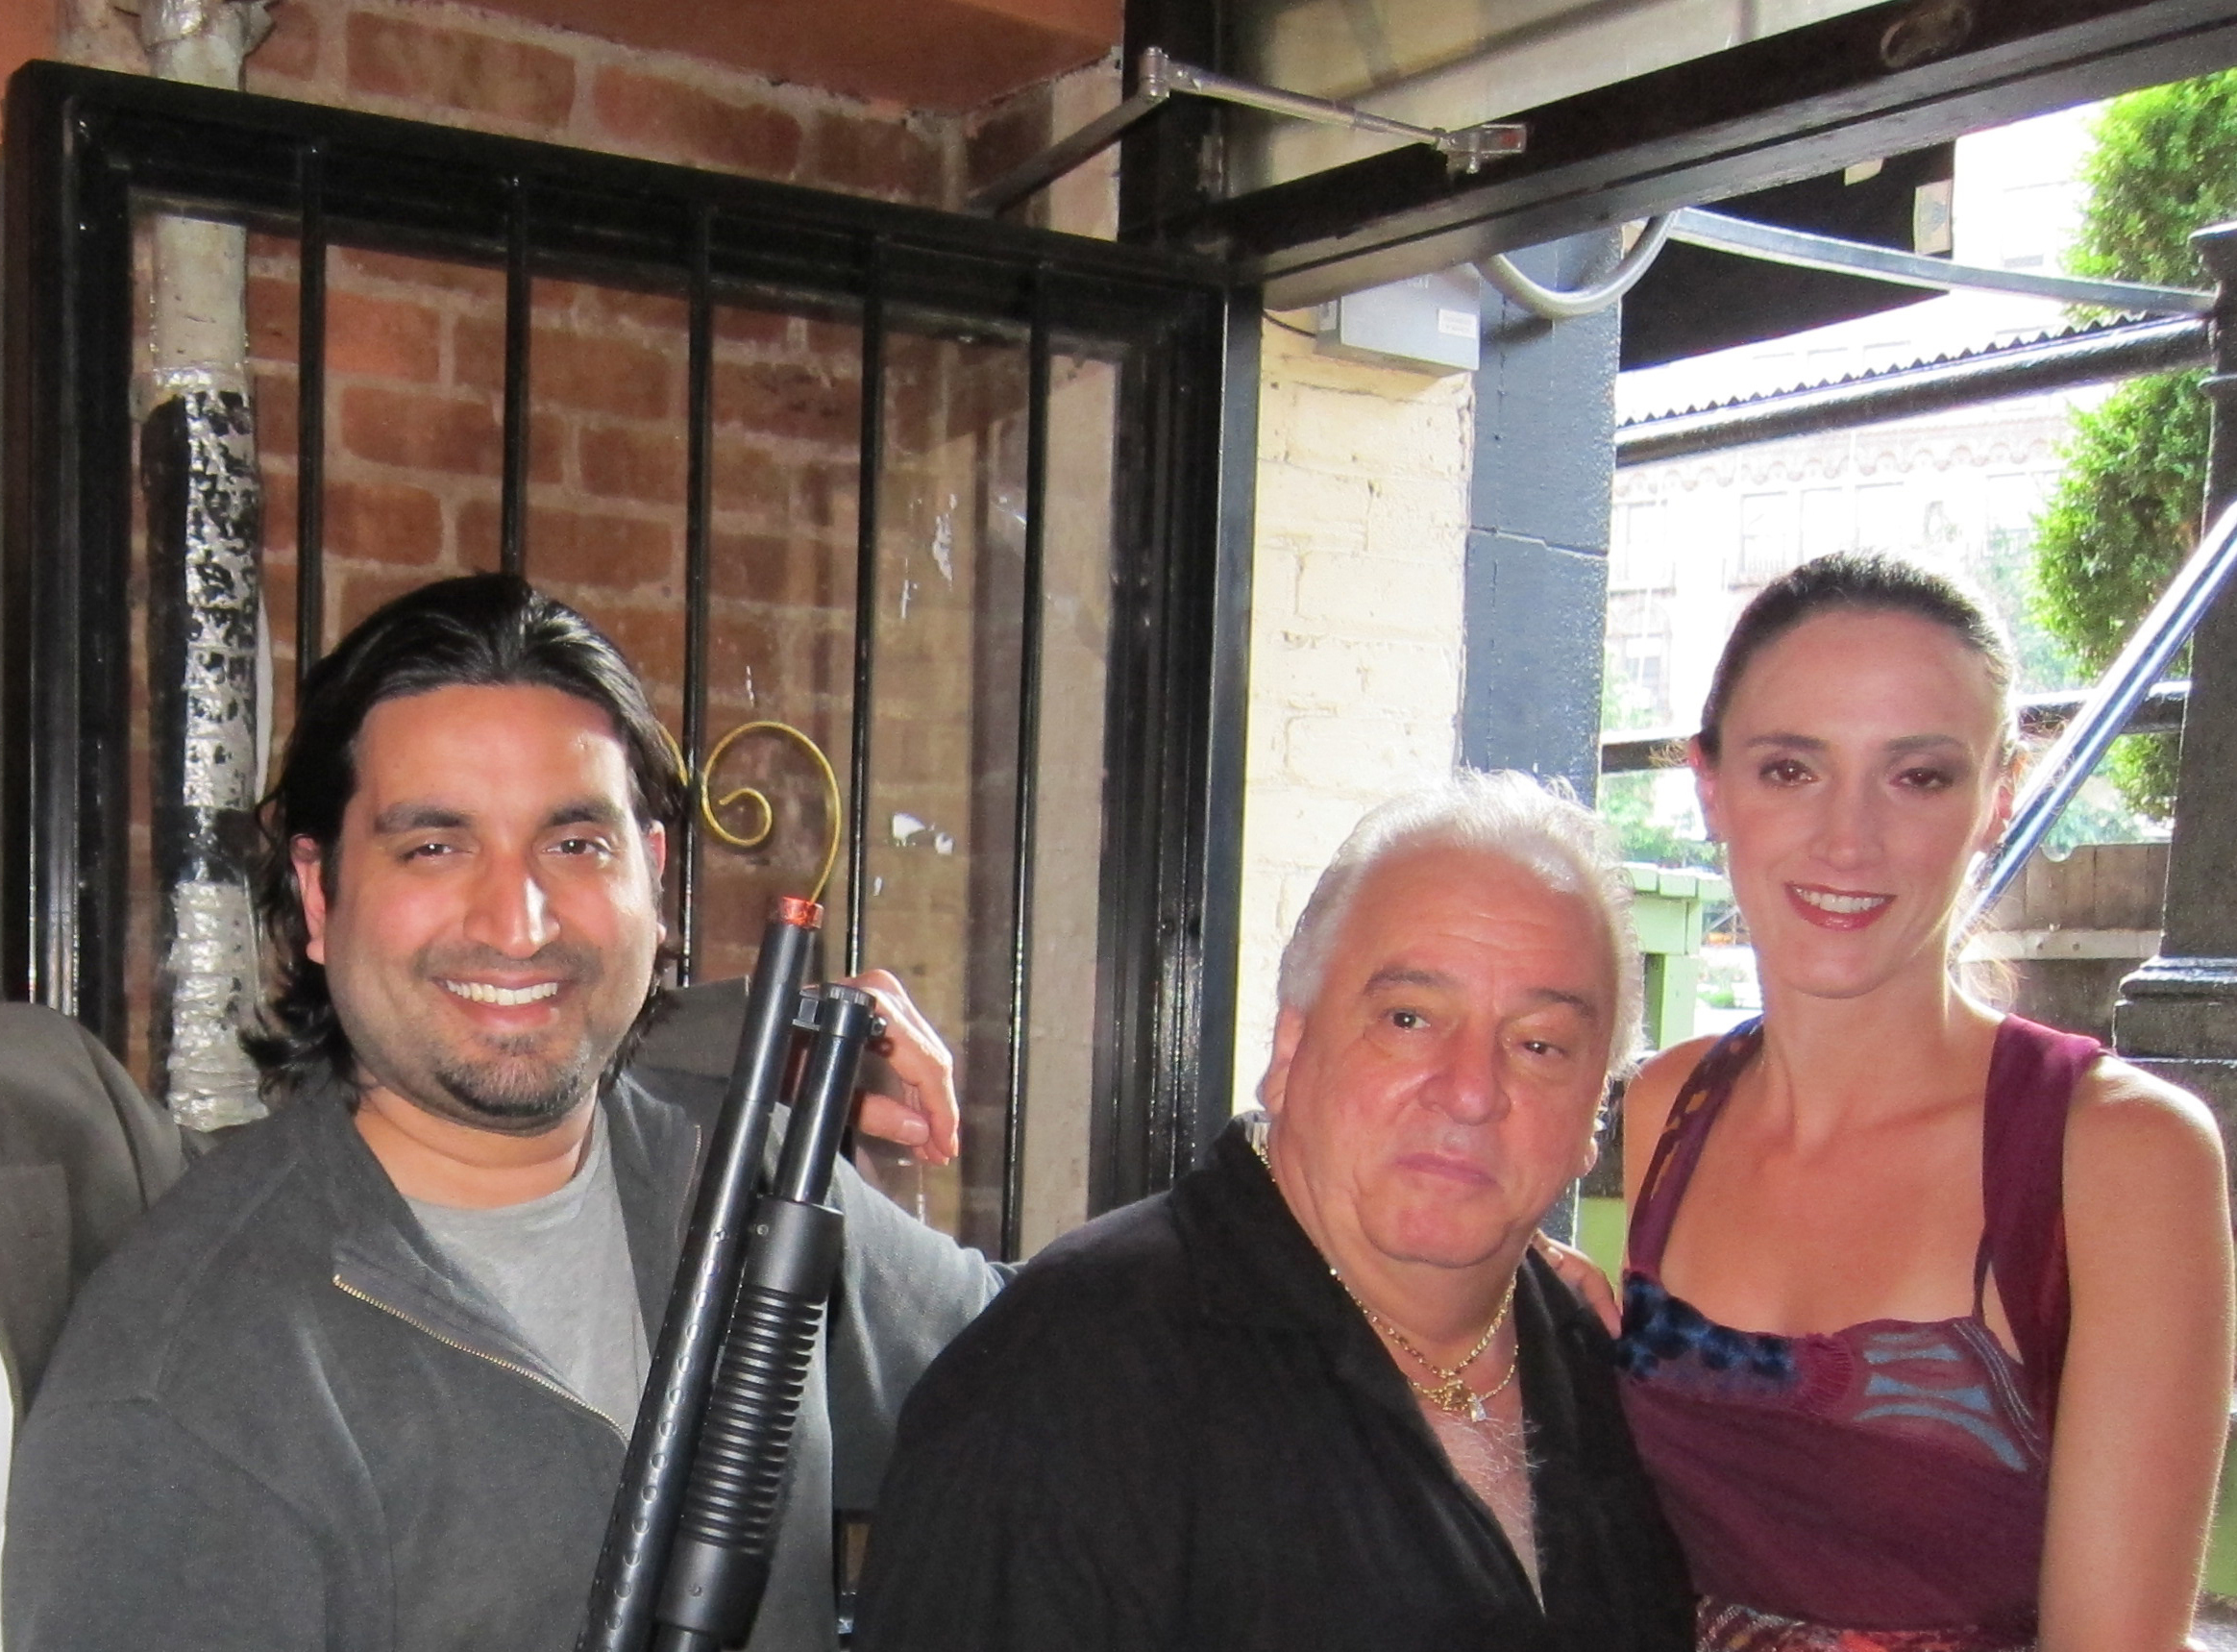 Vinny Vella (Casino, The Sopranos, Kill the Irishman), Miriam Weisbecker (He's Way More Famous Than You, Blemished Light) and Ronnie Banerjee on the set of Night Bird